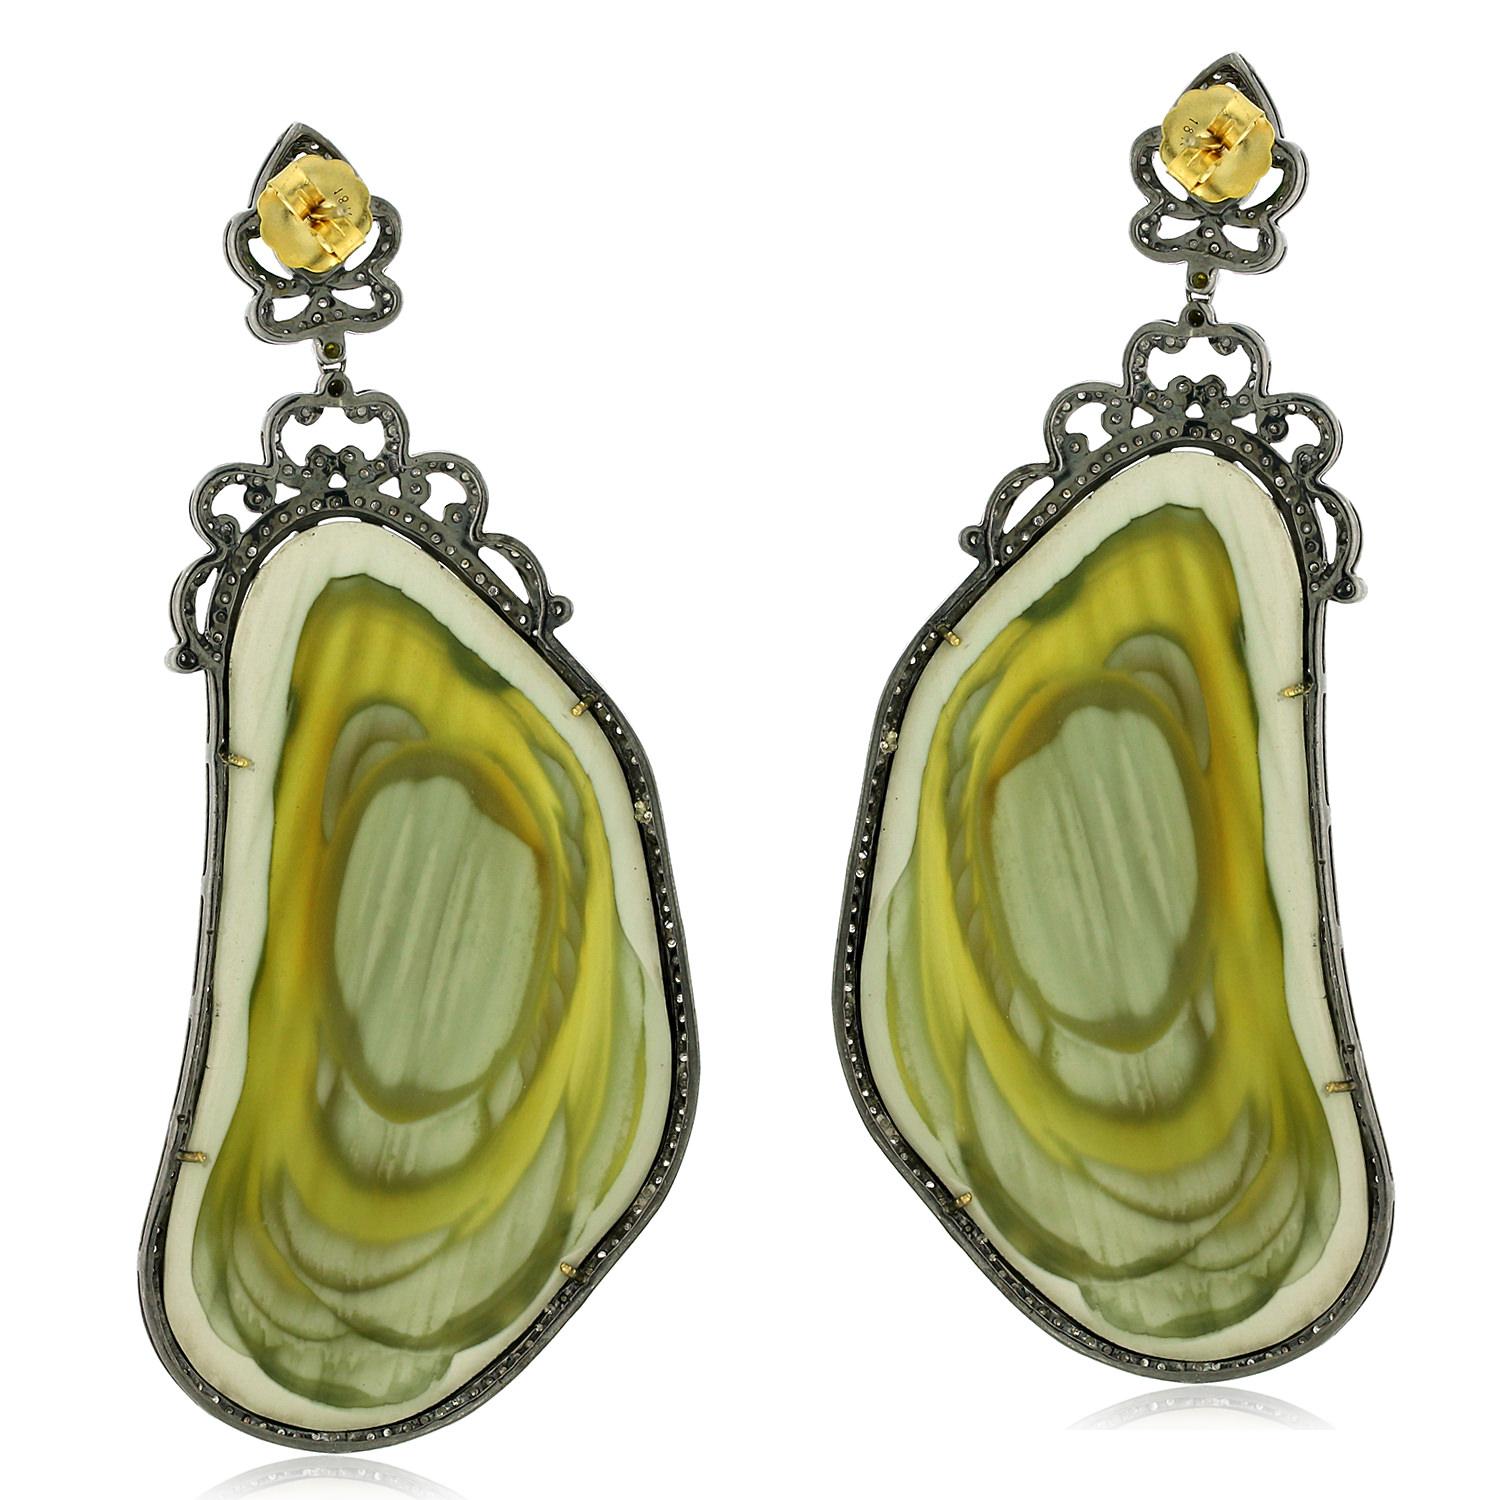 Nugget-shaped jasper dangle earrings crafted in 18k gold featuring emerald and pave diamonds. Add a touch of luxury to your look with these unique, stylish earrings.